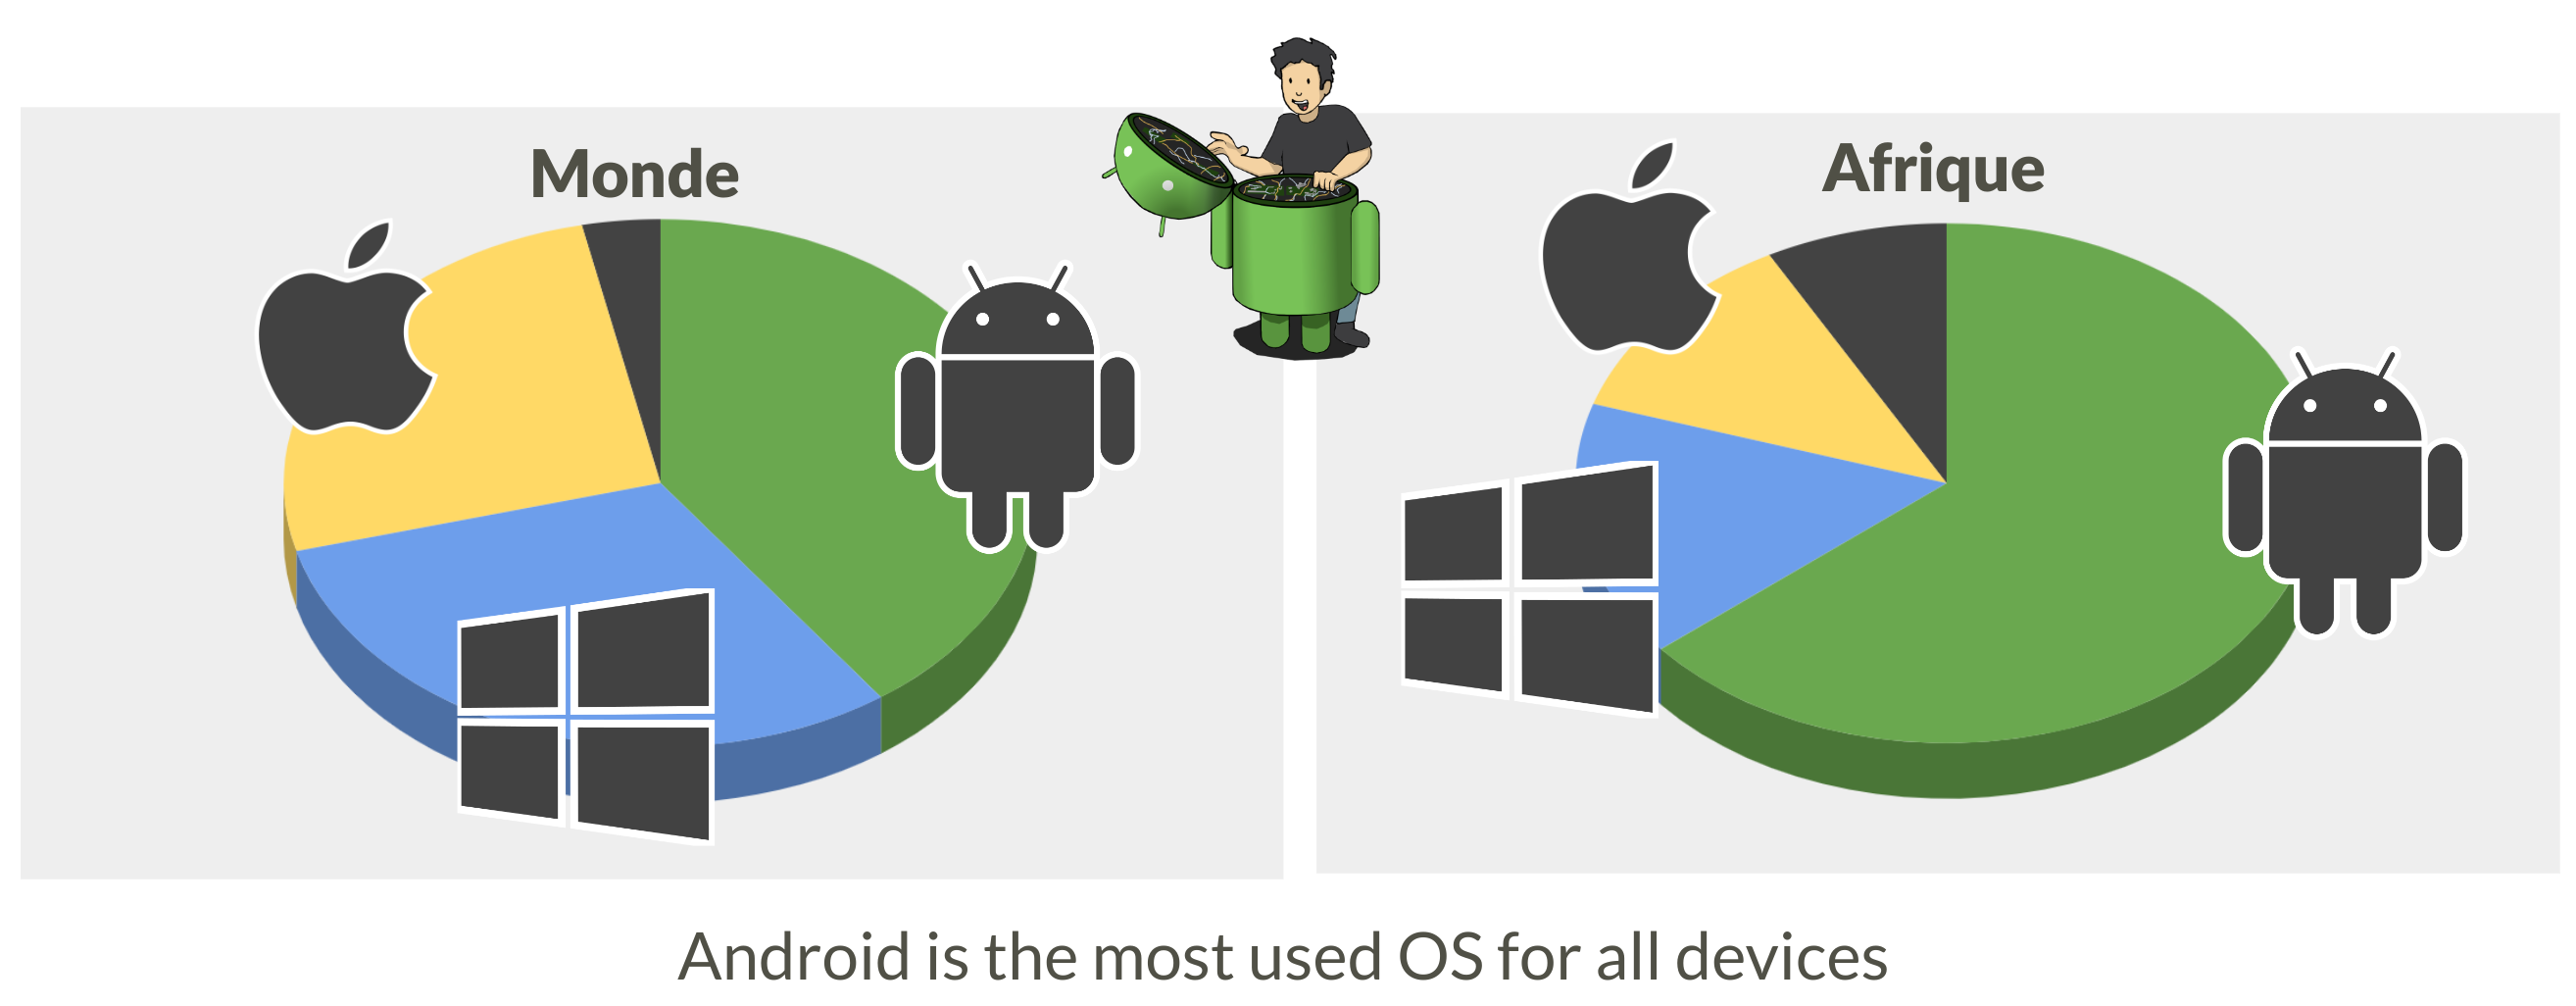 Android vs other OS